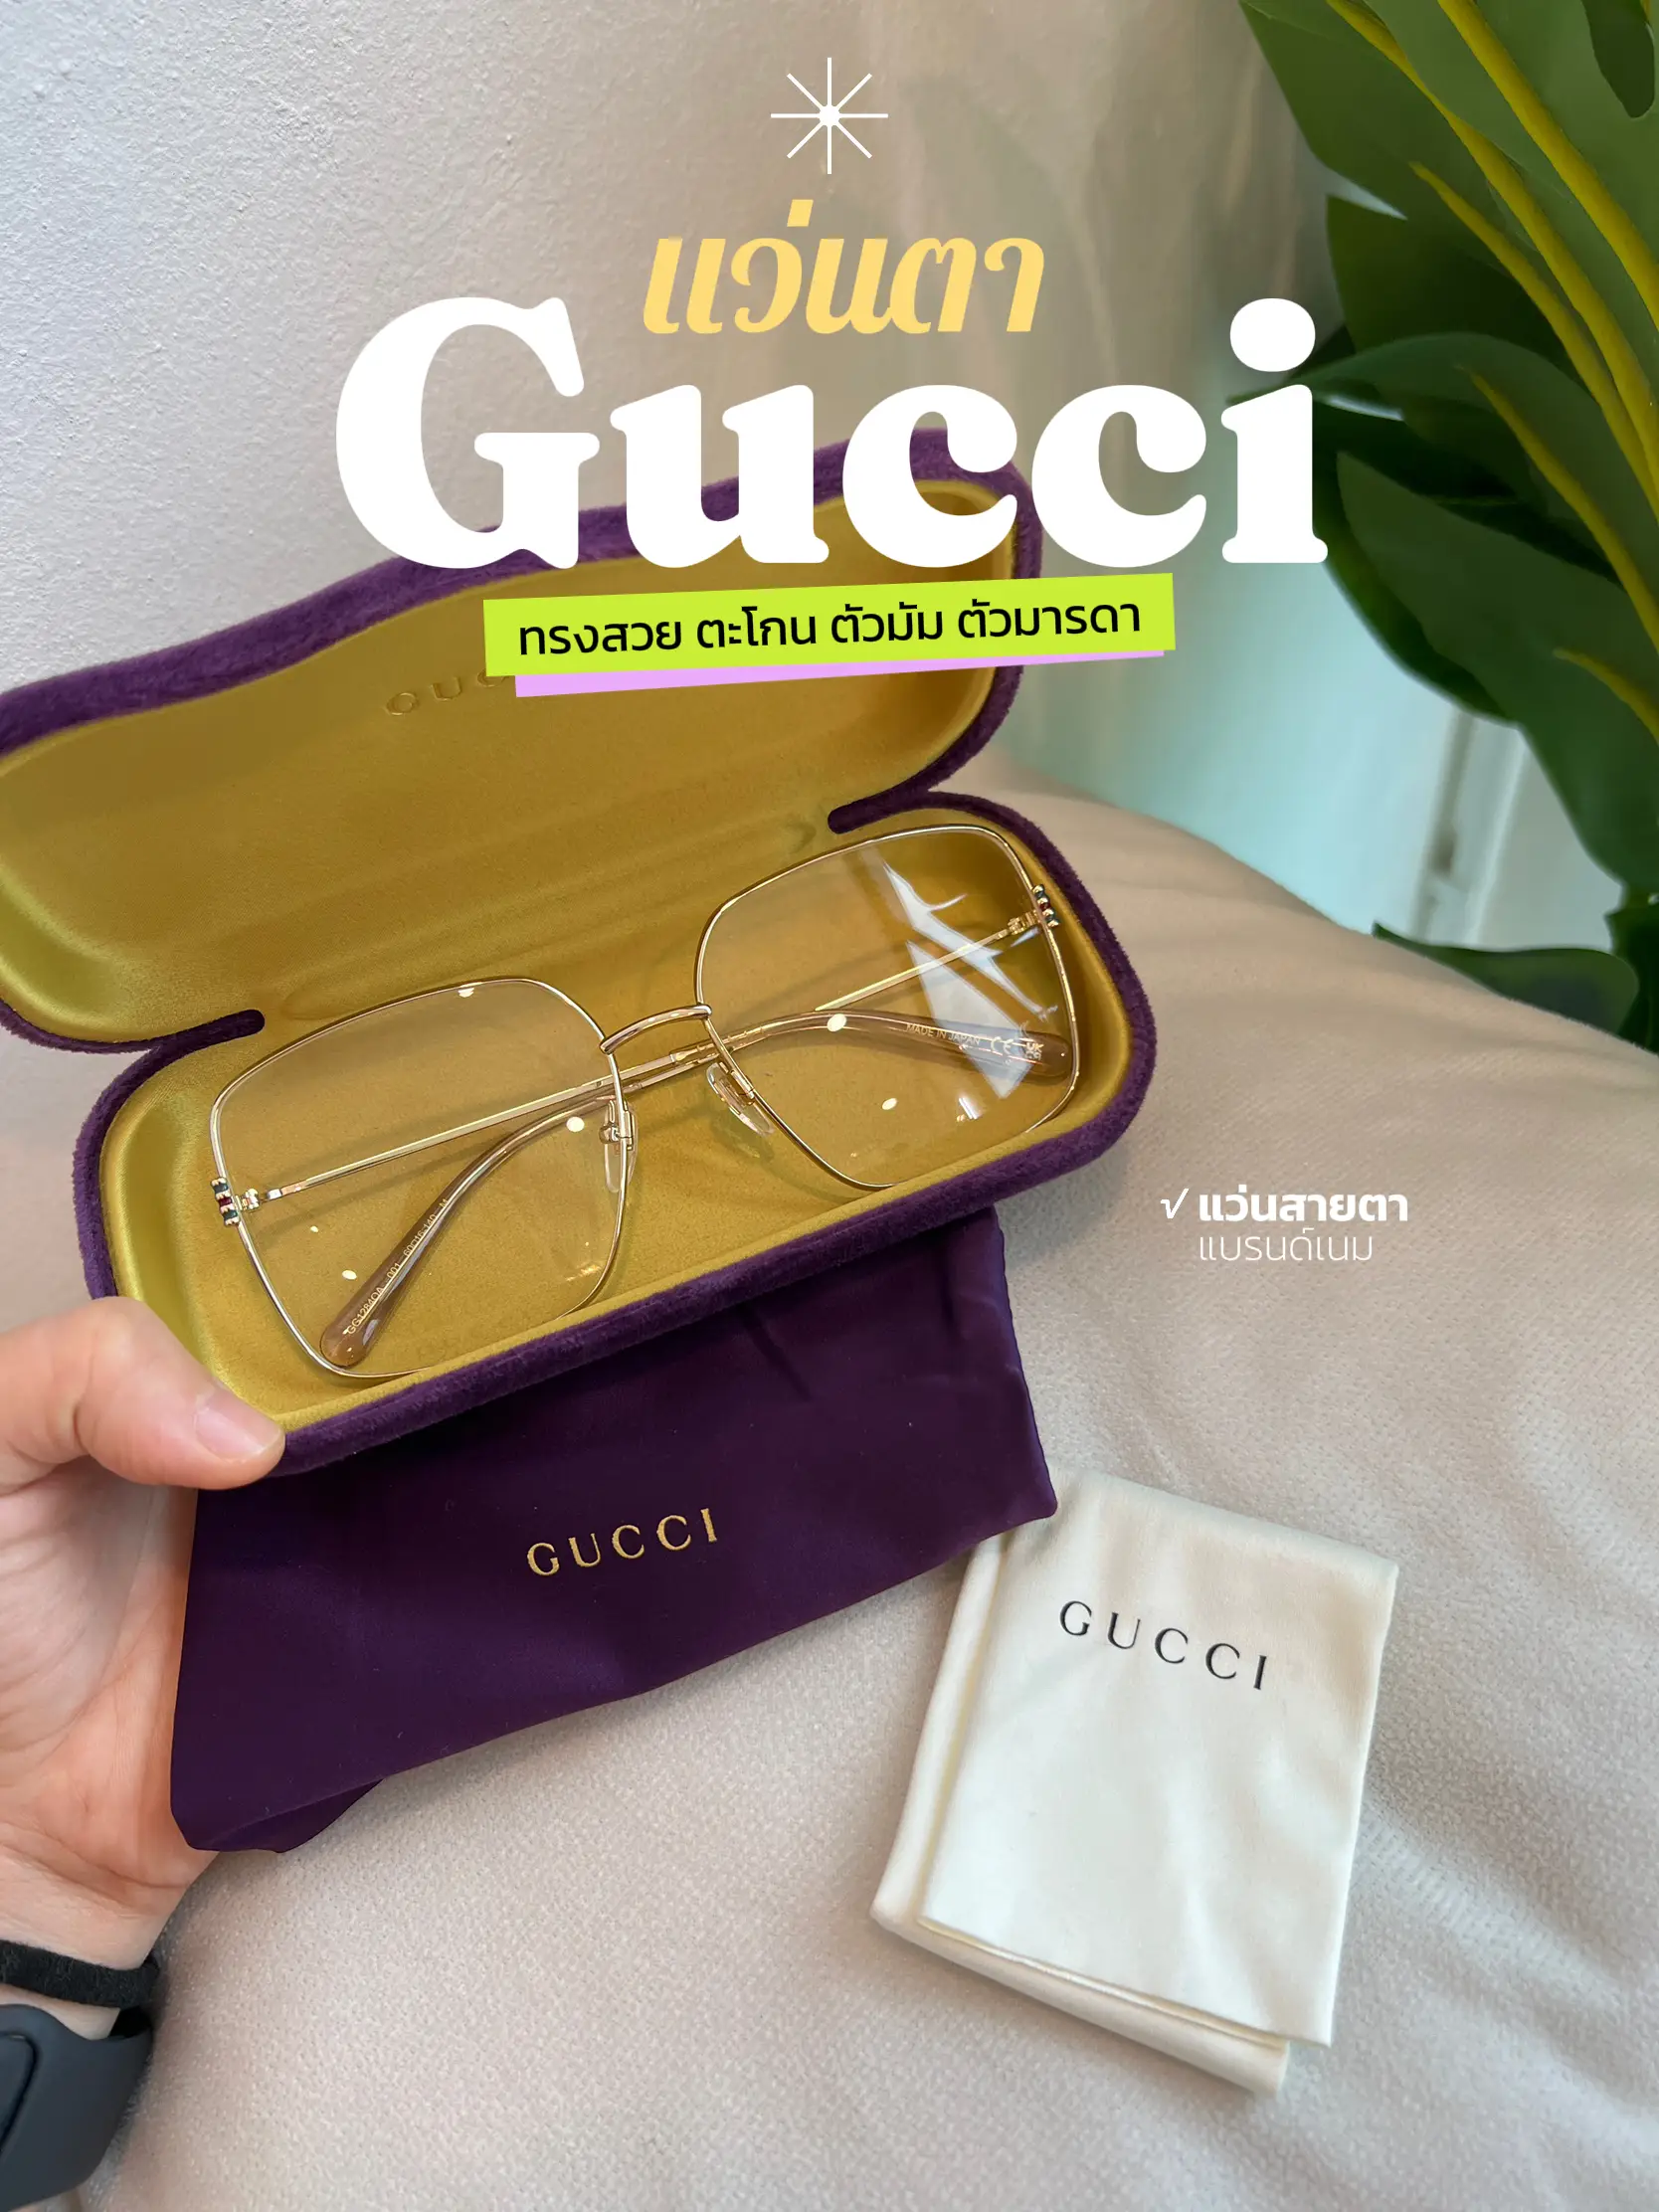 Are Gucci Sunglasses Worth the Price Tag? - The TRUTH About Motherhood